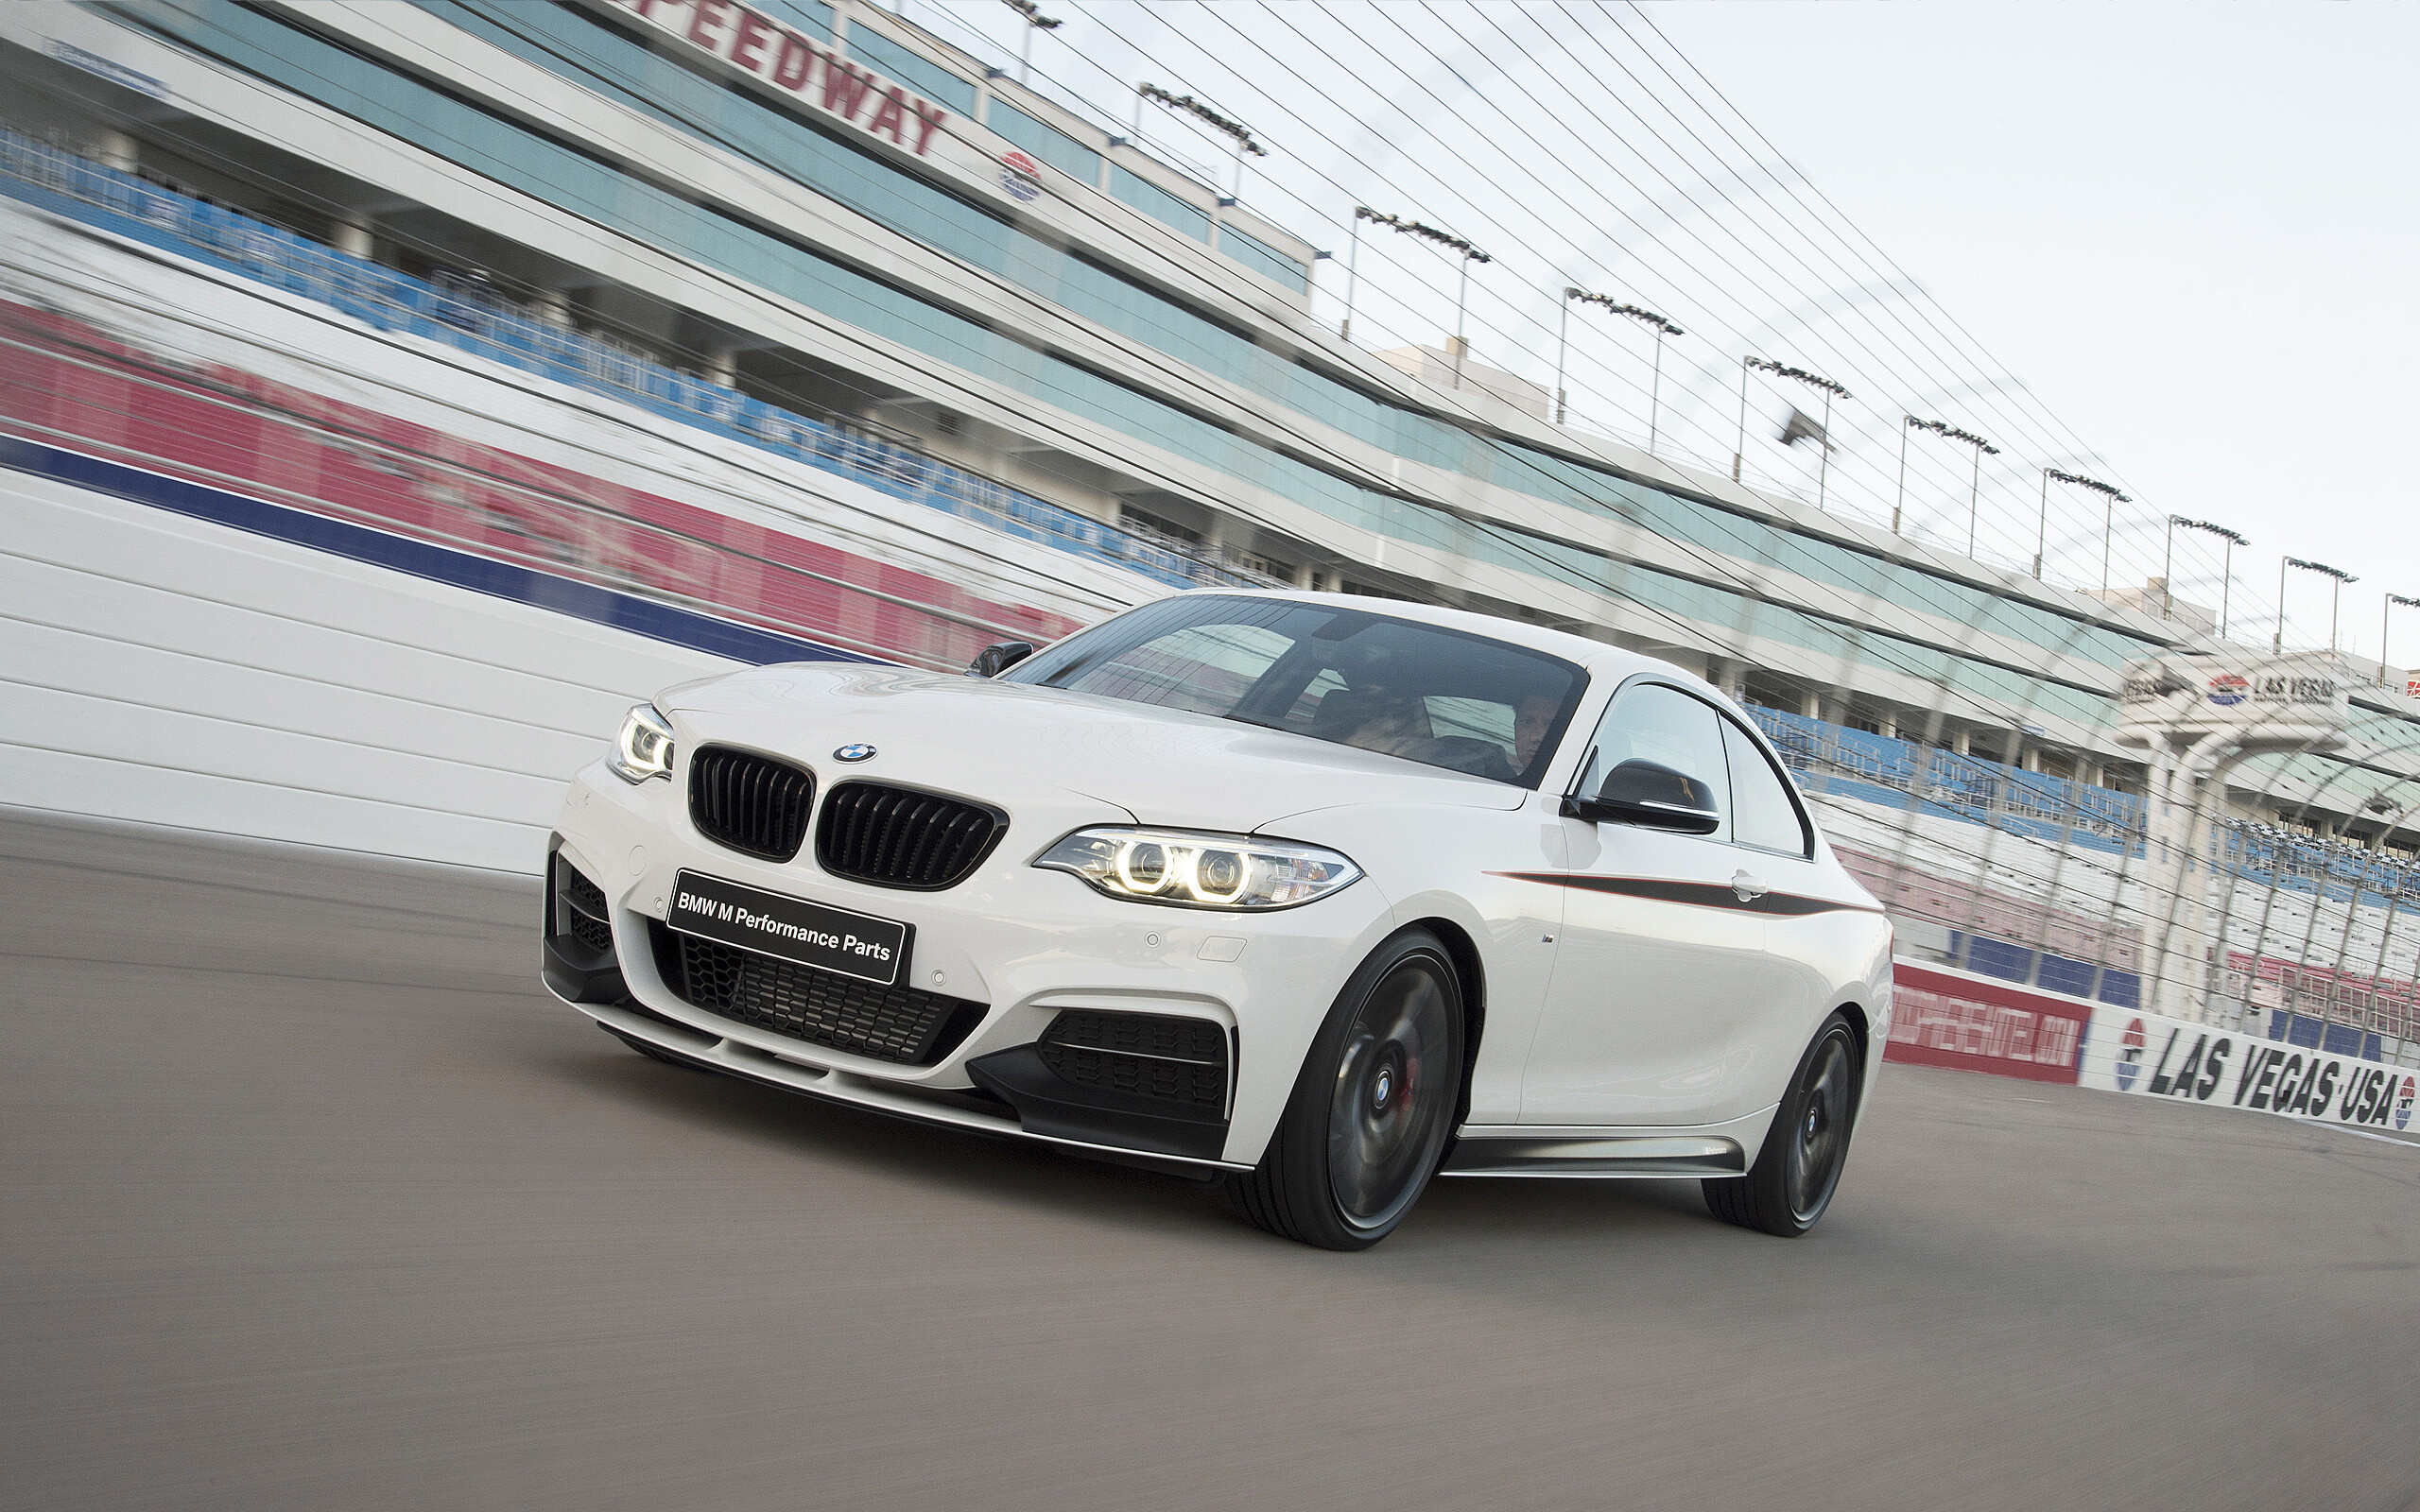 BMW 2 Series: German luxury car brand, Coupe, Turbocharged four-cylinder engine. 2560x1600 HD Background.